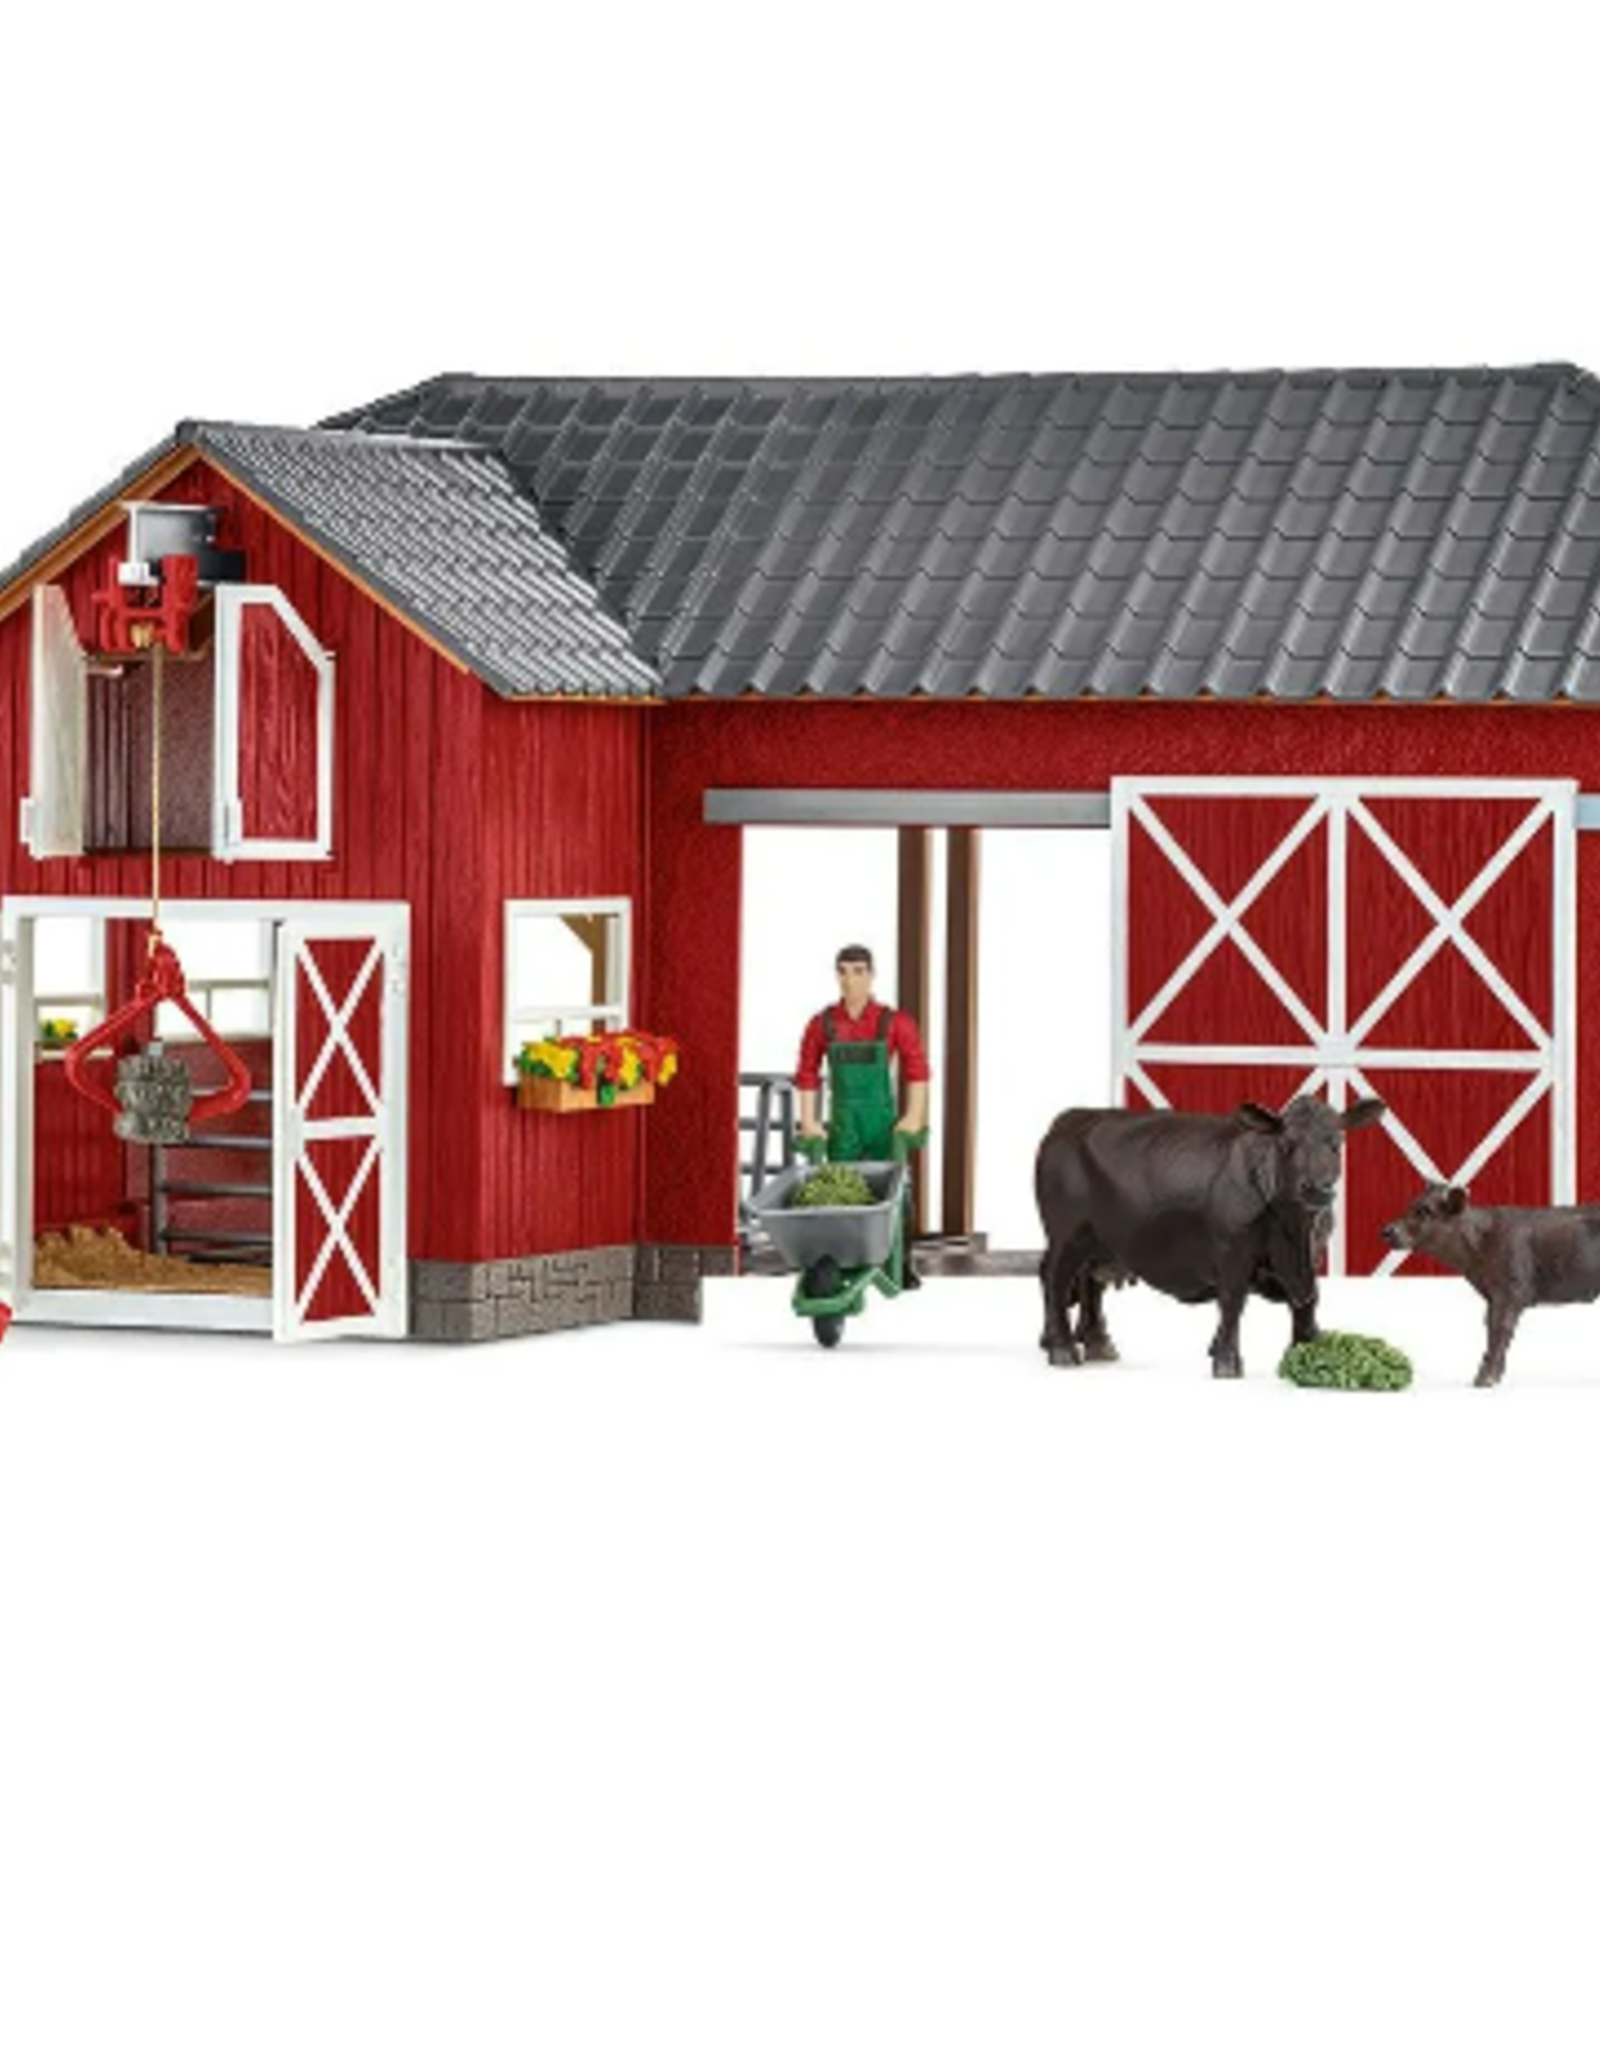 SCHLEICH LARGE FARM WITH BLACK ANGUS